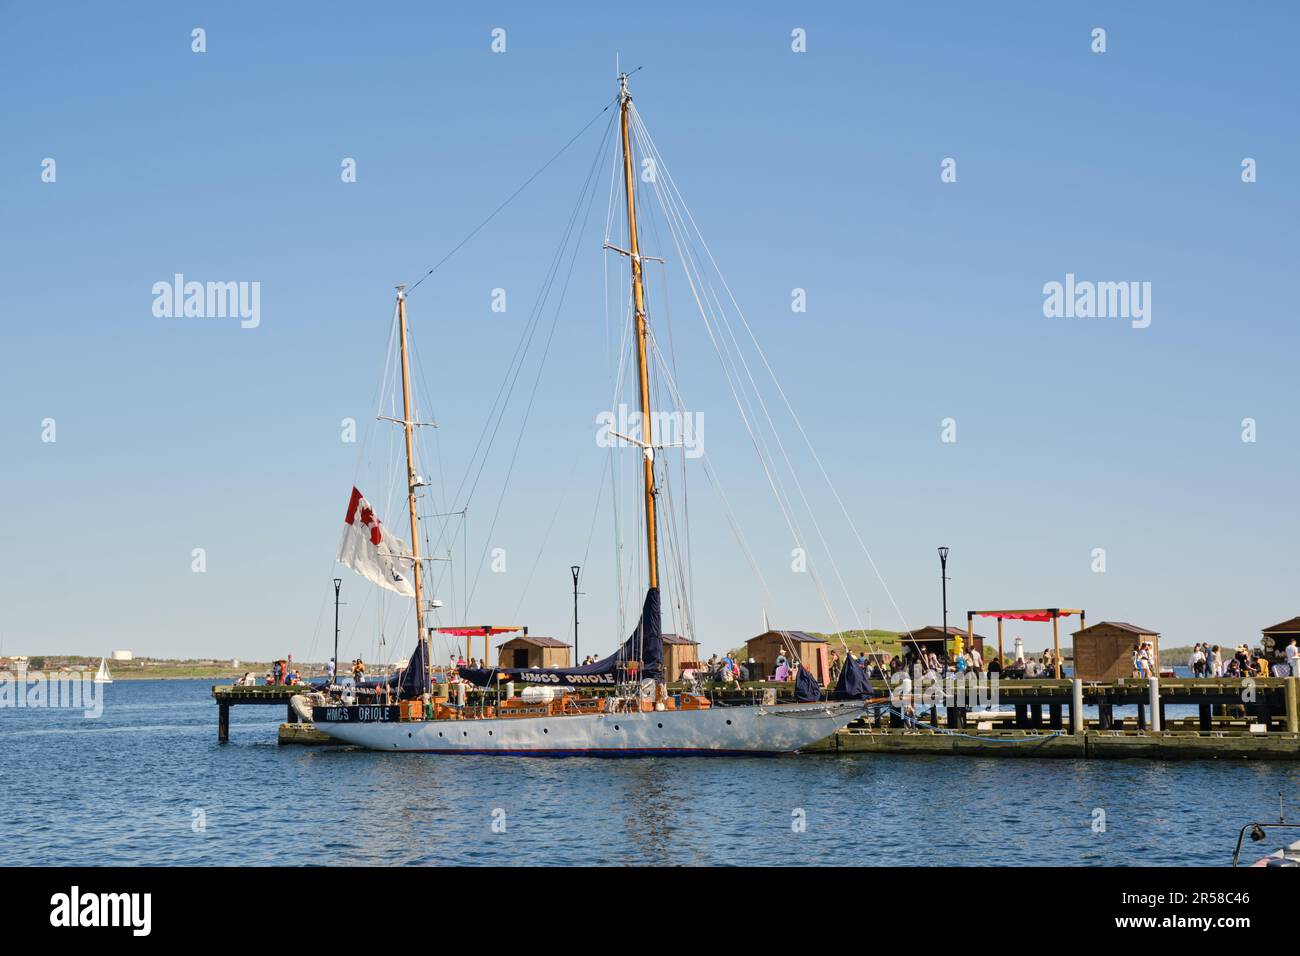 The HMCS Oriole sail boat anchored on the Halifax waterfront Stock Photo